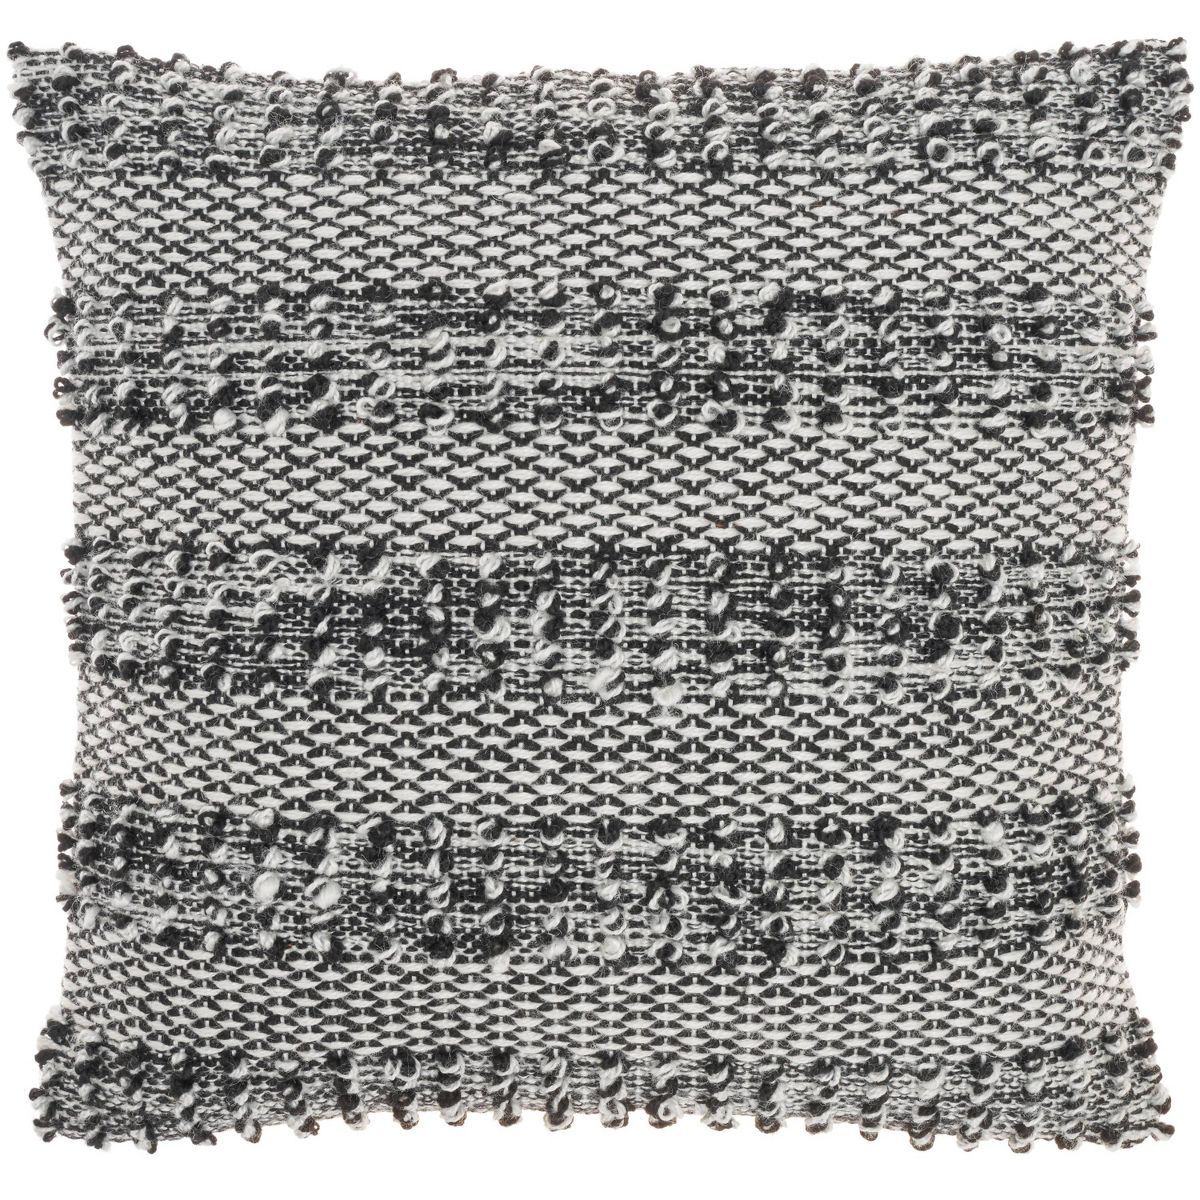 18"x18" Woven Striped and Dots Square Throw Pillow - Mina Victory | Target